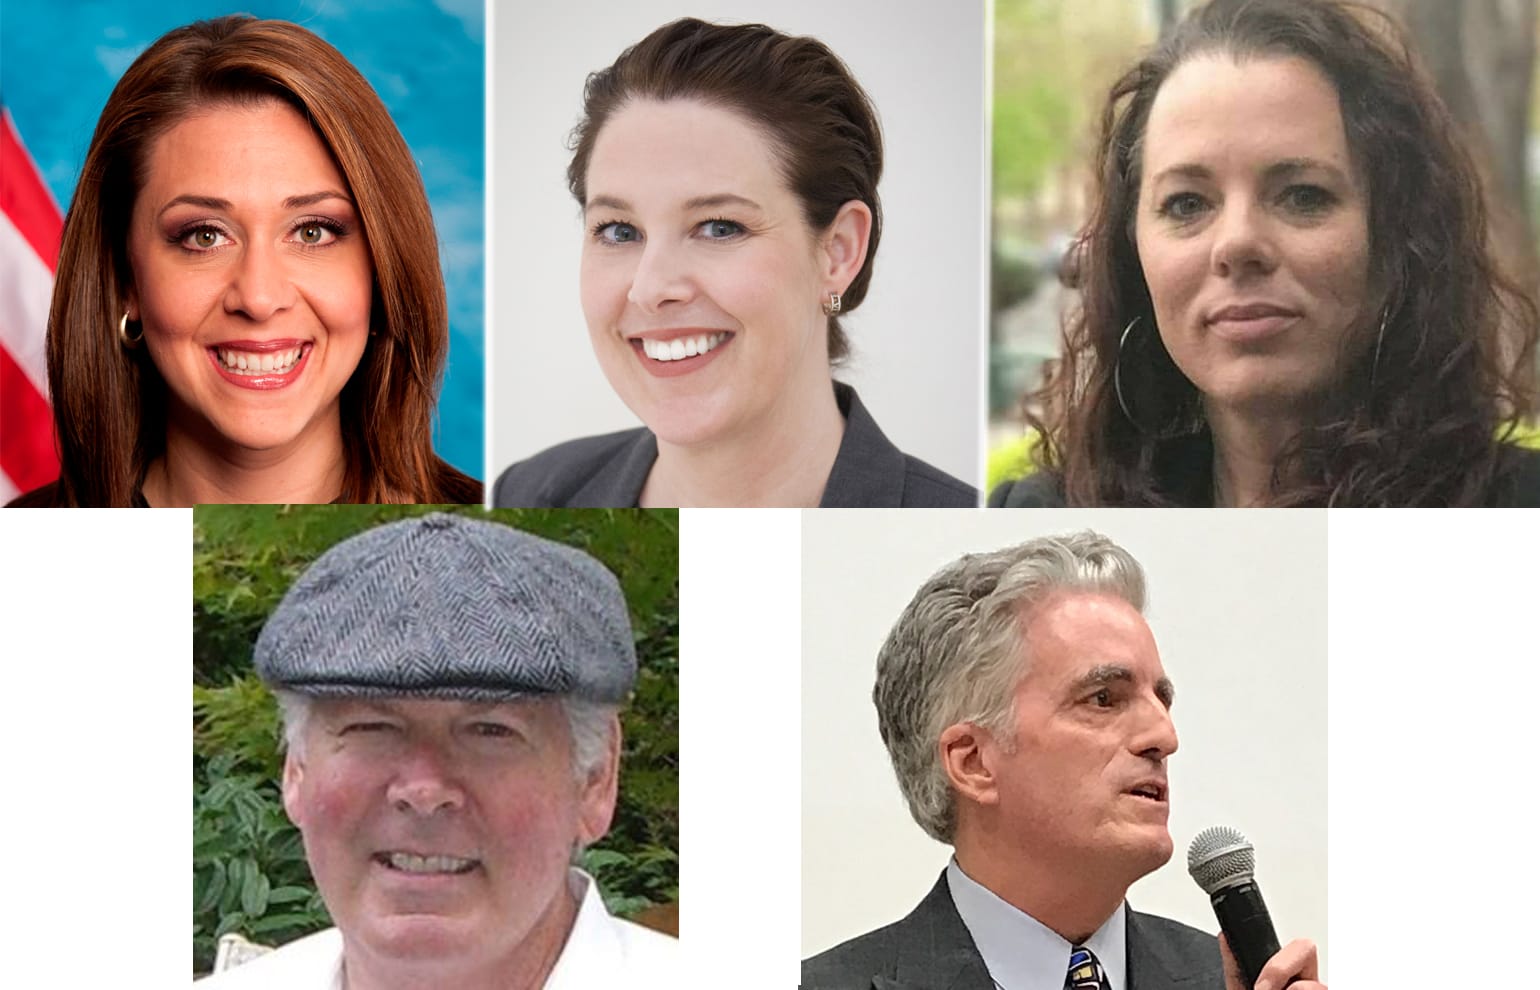 Candidates for the Third Congressional District, clockwise from top left: Rep. Jaime Herrera Beutler, Carolyn Long, Dorothy Gasque, David McDevitt, Earl Bowerman filed campaign spend with the FEC. Martin Hash and Michael Cortney did not file.